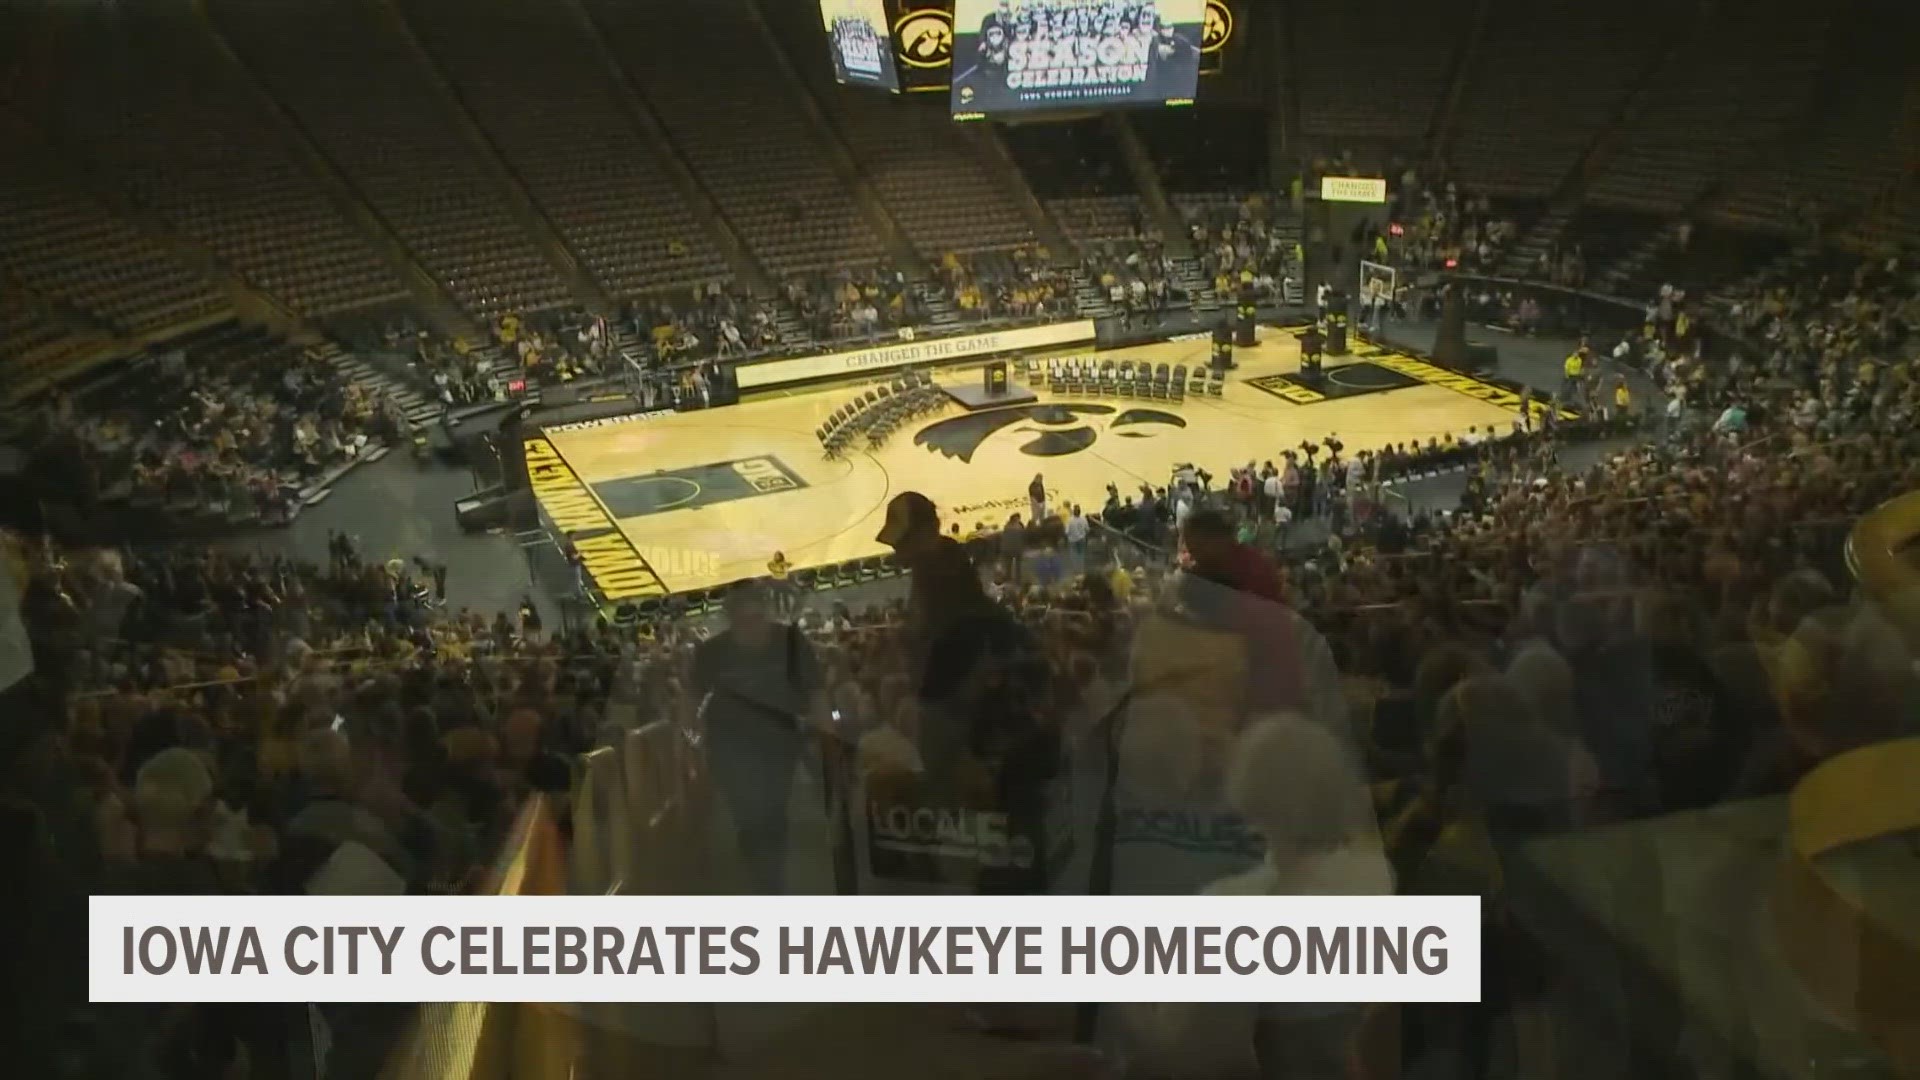 The event welcomes the Hawkeyes home after their second-consecutive NCAA Women's Basketball Championship appearance.